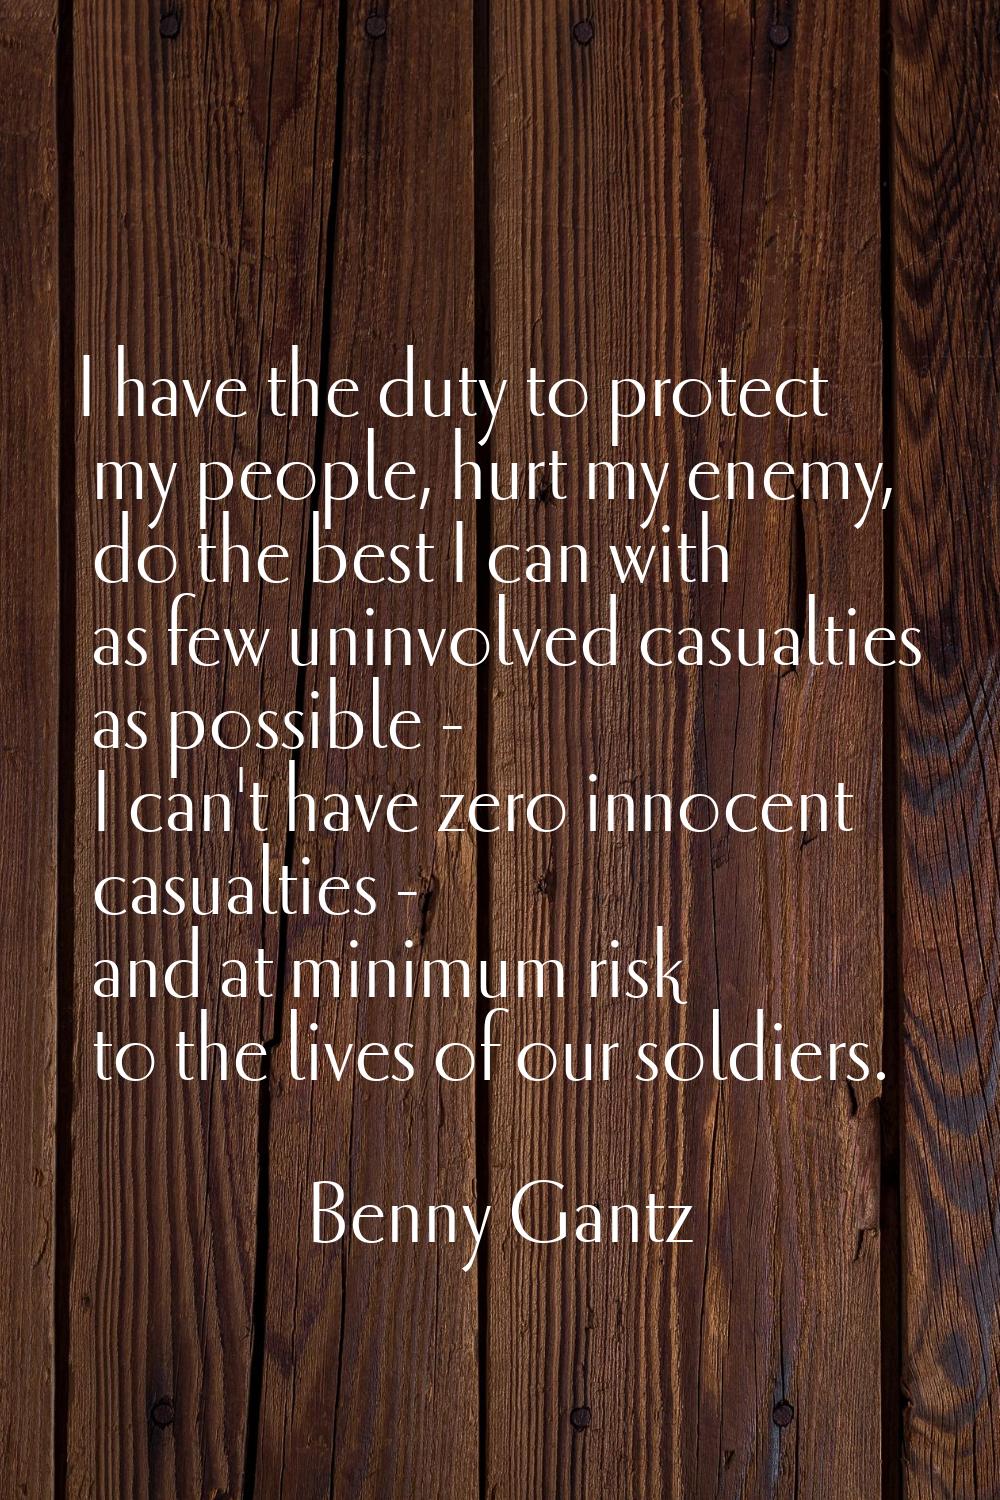 I have the duty to protect my people, hurt my enemy, do the best I can with as few uninvolved casua